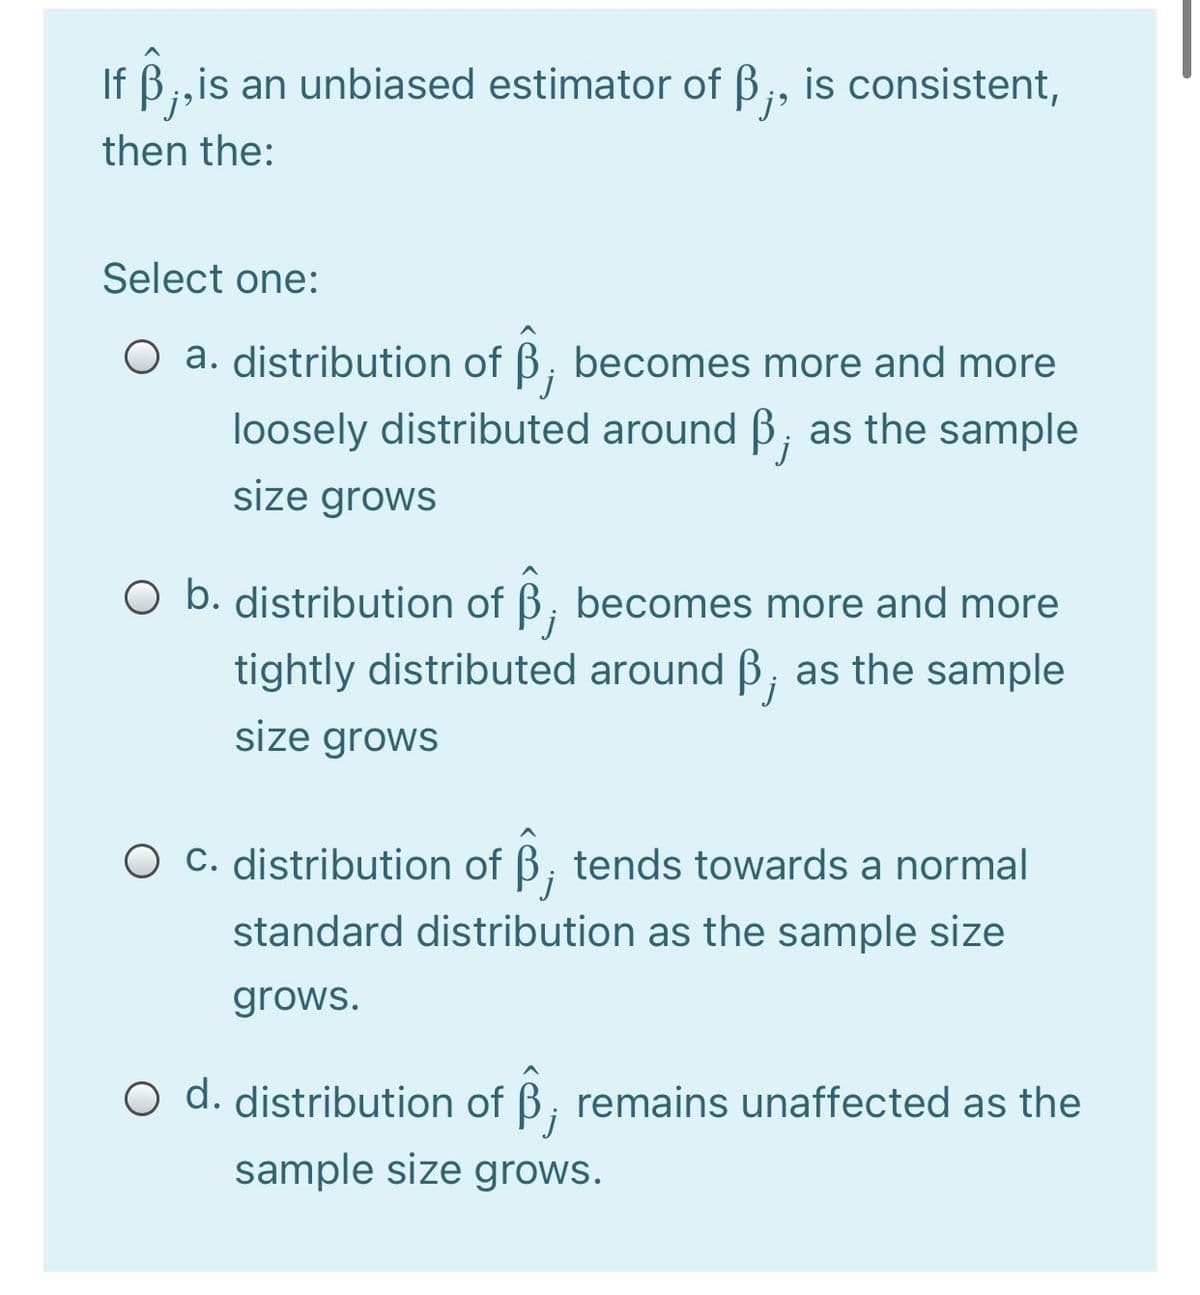 If B;,is an unbiased estimator of B;, is consistent,
then the:
Select one:
O a. distribution of B, becomes more and more
loosely distributed around ß, as the sample
size grows
O b. distribution of B, becomes more and more
tightly distributed around B, as the sample
size grows
C. distribution of B; tends towards a normal
j
standard distribution as the sample size
grows.
O d. distribution of B, remains unaffected as the
sample size grows.
